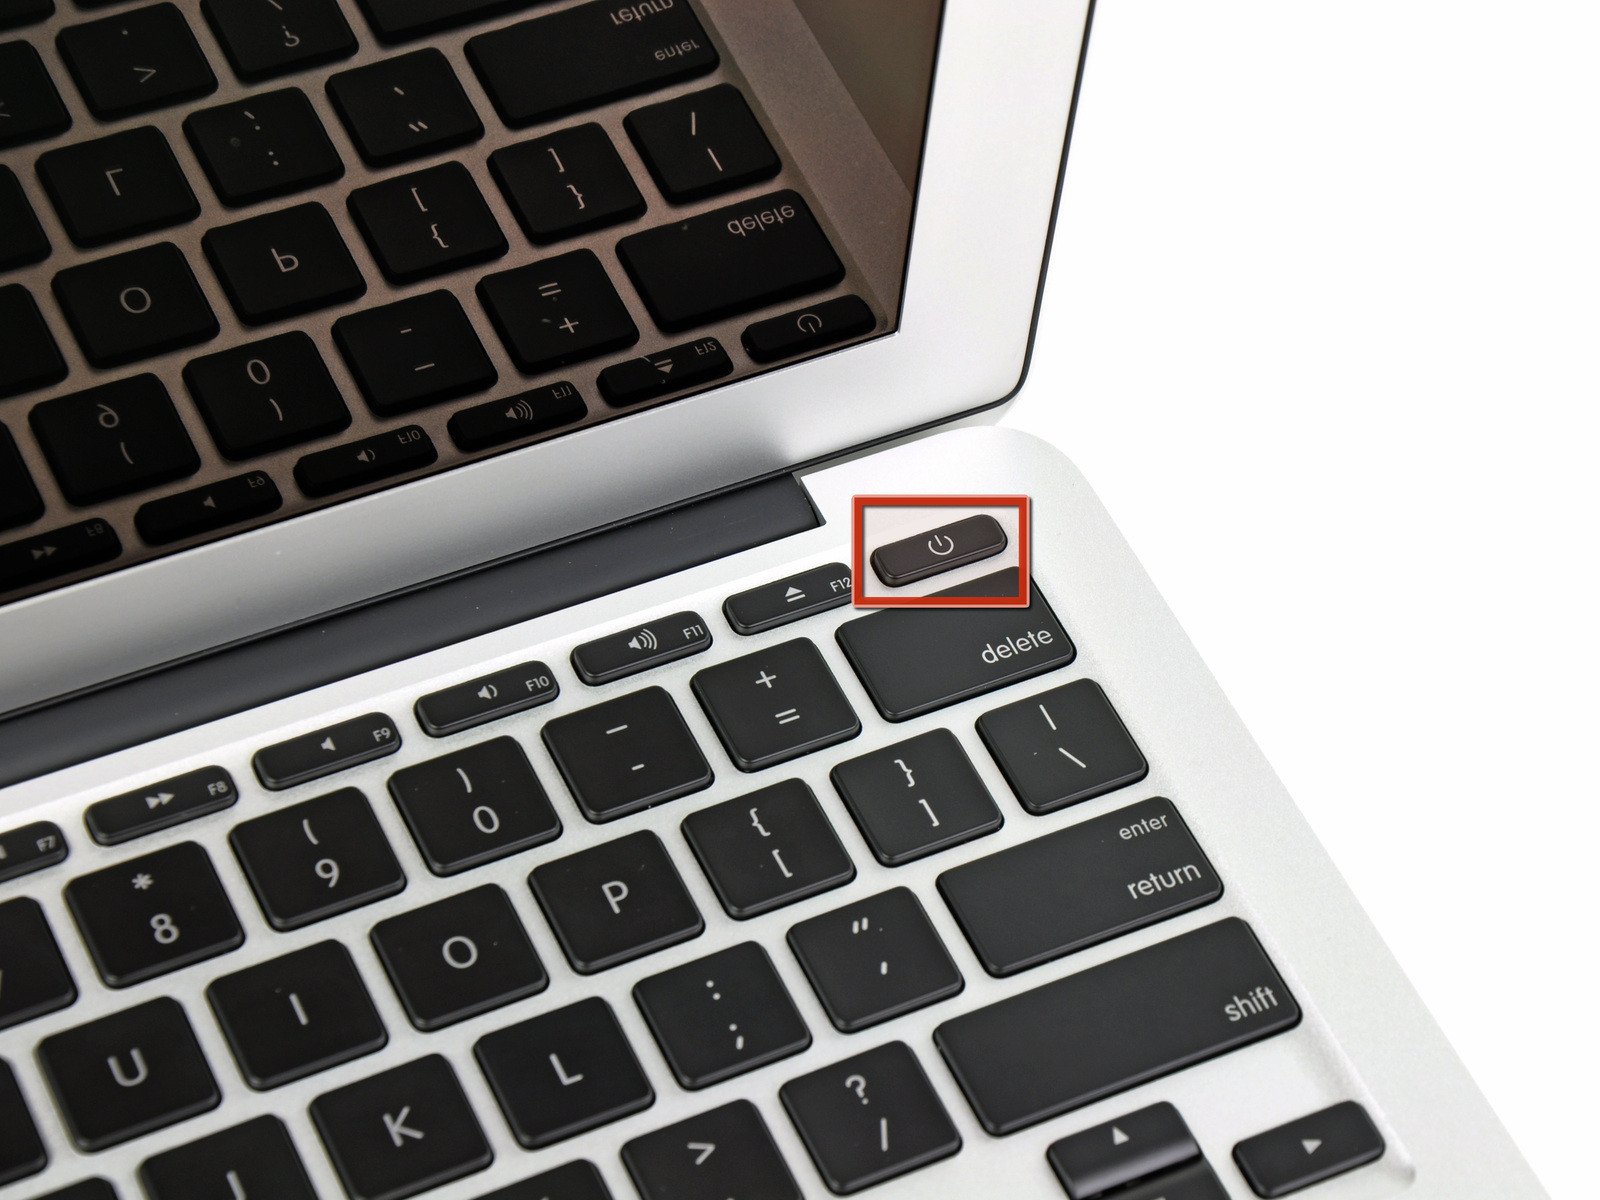 keyboard - What's the purpose of the eject button on the MacBook Air ...